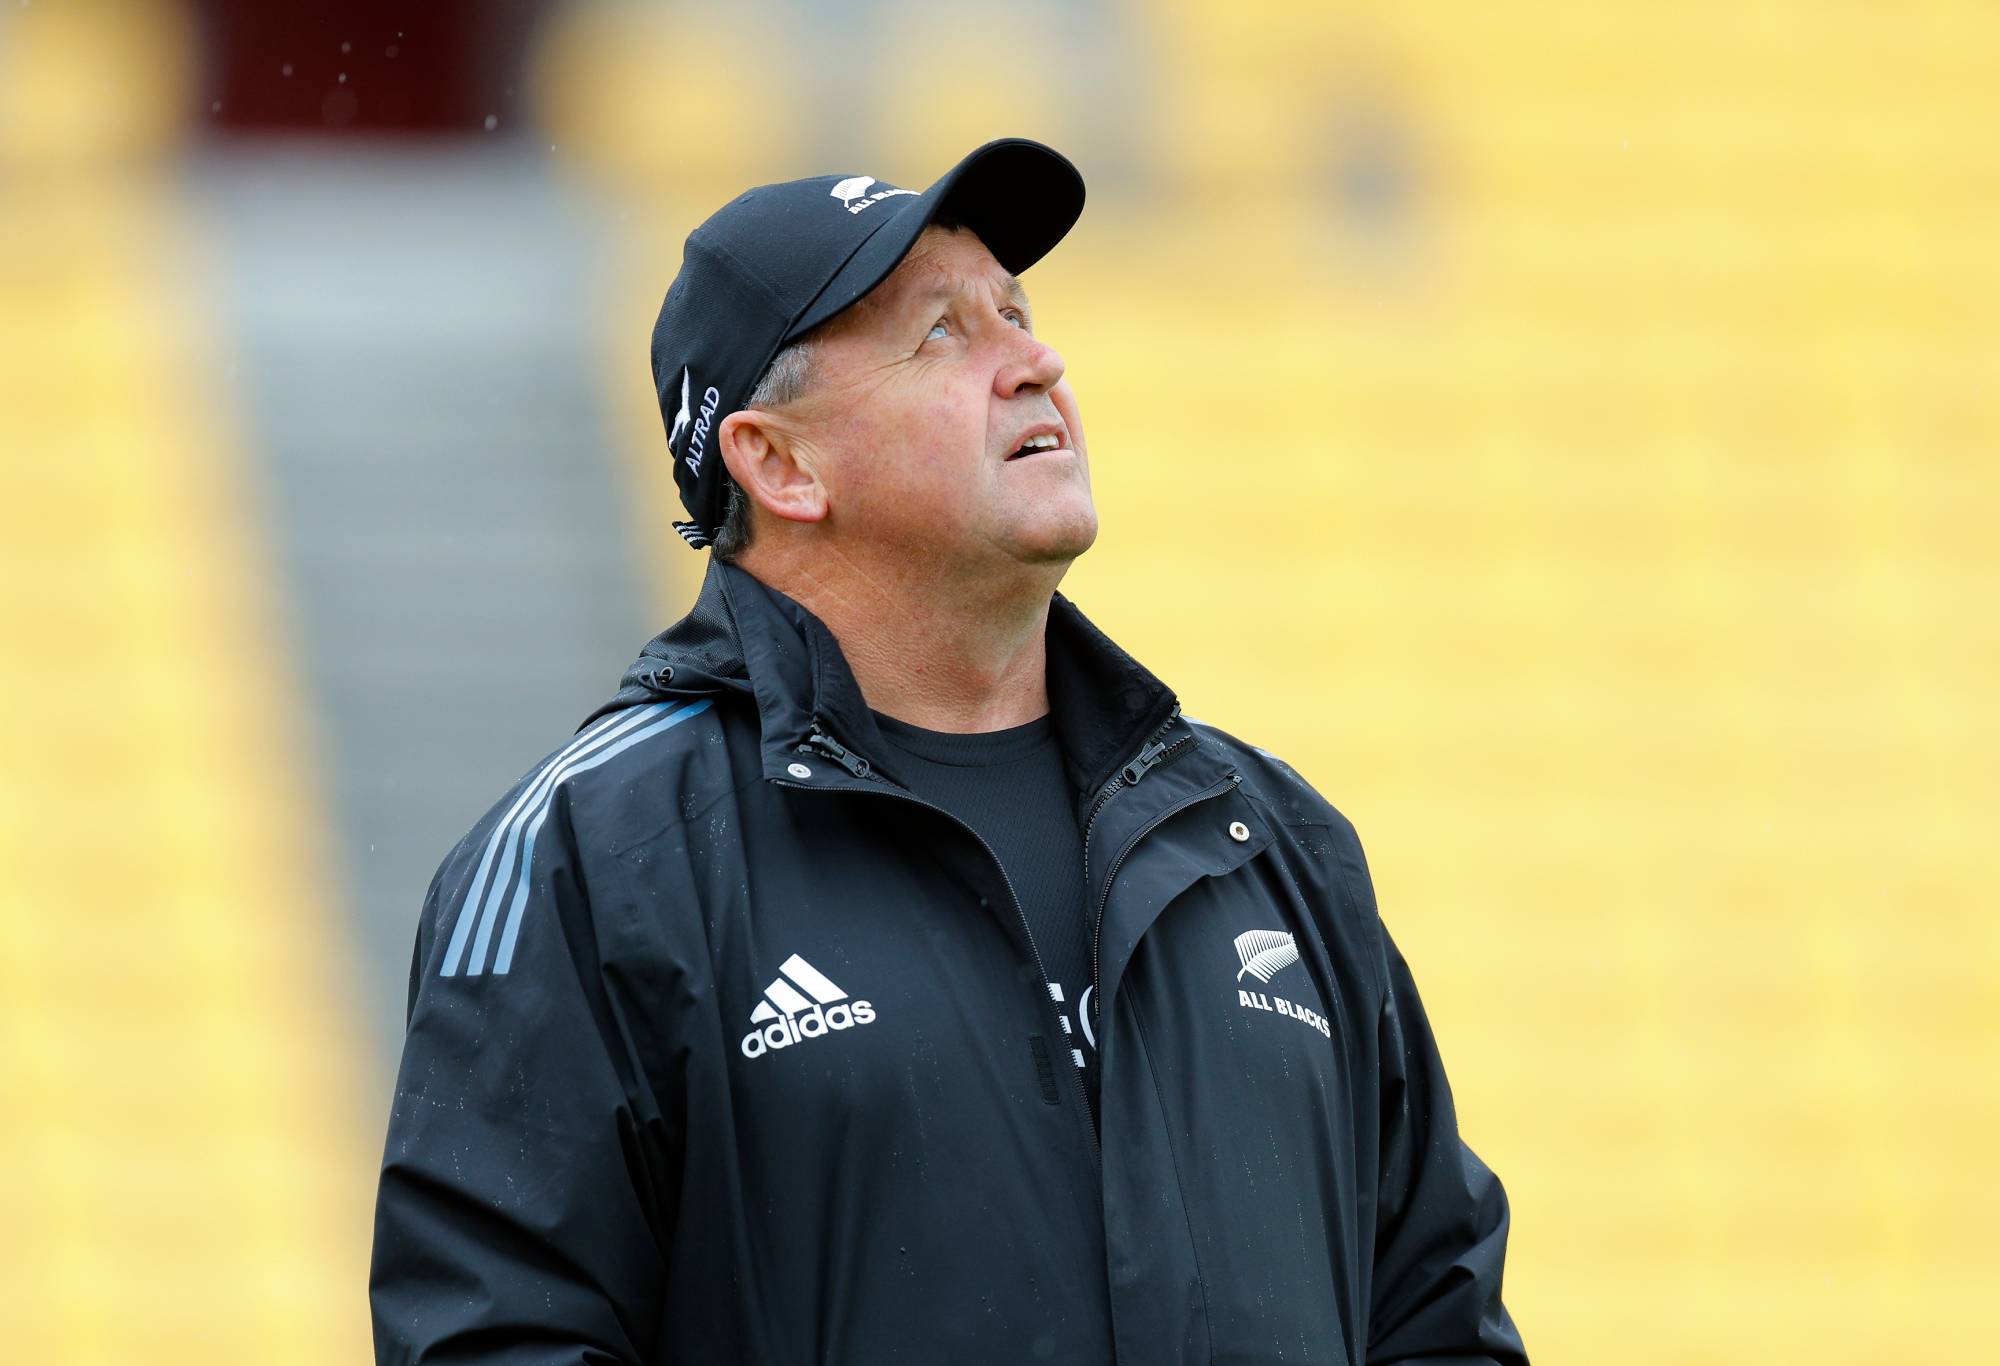 Coach Ian Foster looks on during a New Zealand All Blacks Training Session at Sky Stadium on July 26, 2022 in Wellington, New Zealand. (Photo by Hagen Hopkins/Getty Images)